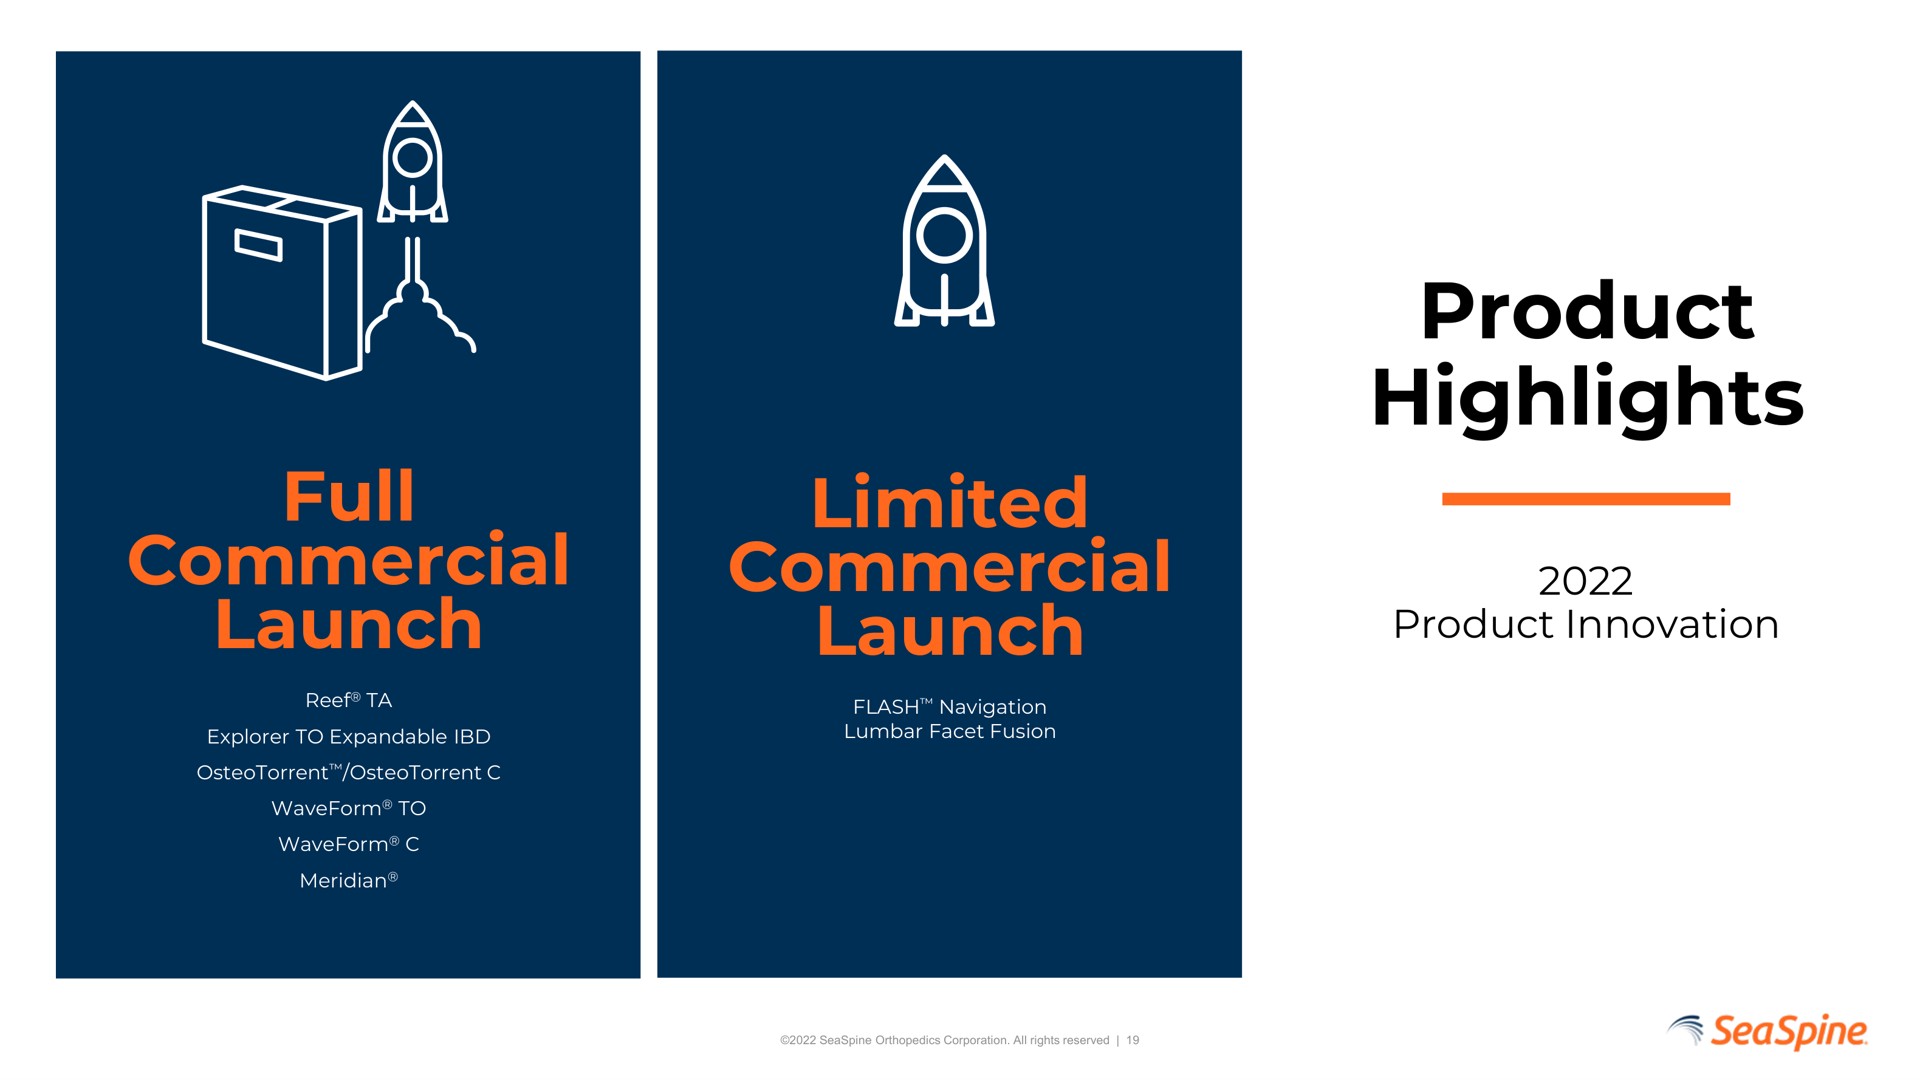 product highlights full commercial launch limited commercial launch | SeaSpine